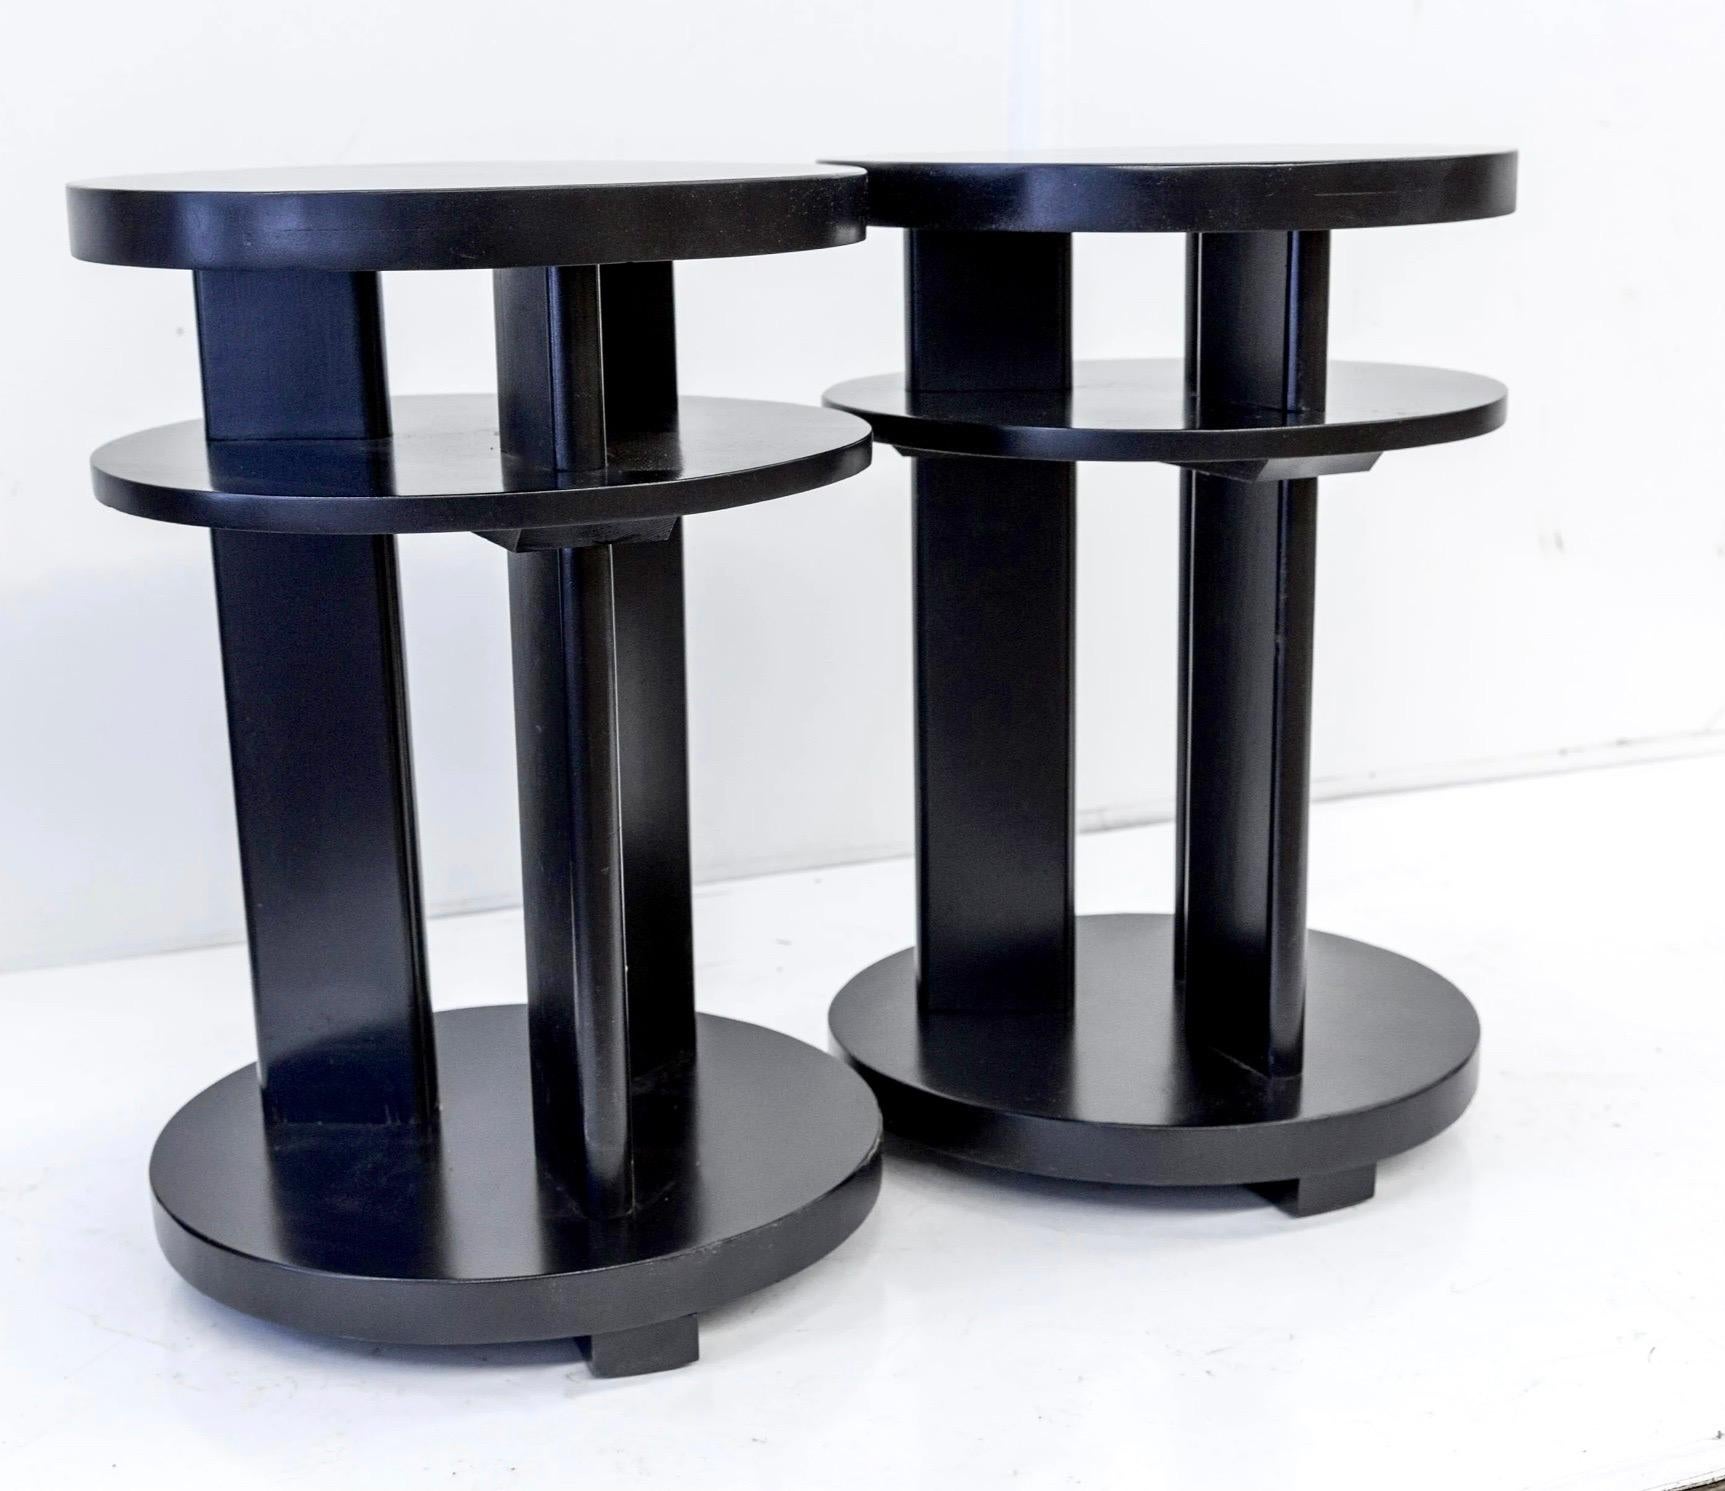 Ebonized mahogany tri-level occasional, side, or lamp table pair, Paul Laszlo, Brown Saltman Los Angeles, c. 1952.

A pioneering force in the evolution of California Modern, Paul László imbued the more rigid European modernism with plusher comfort